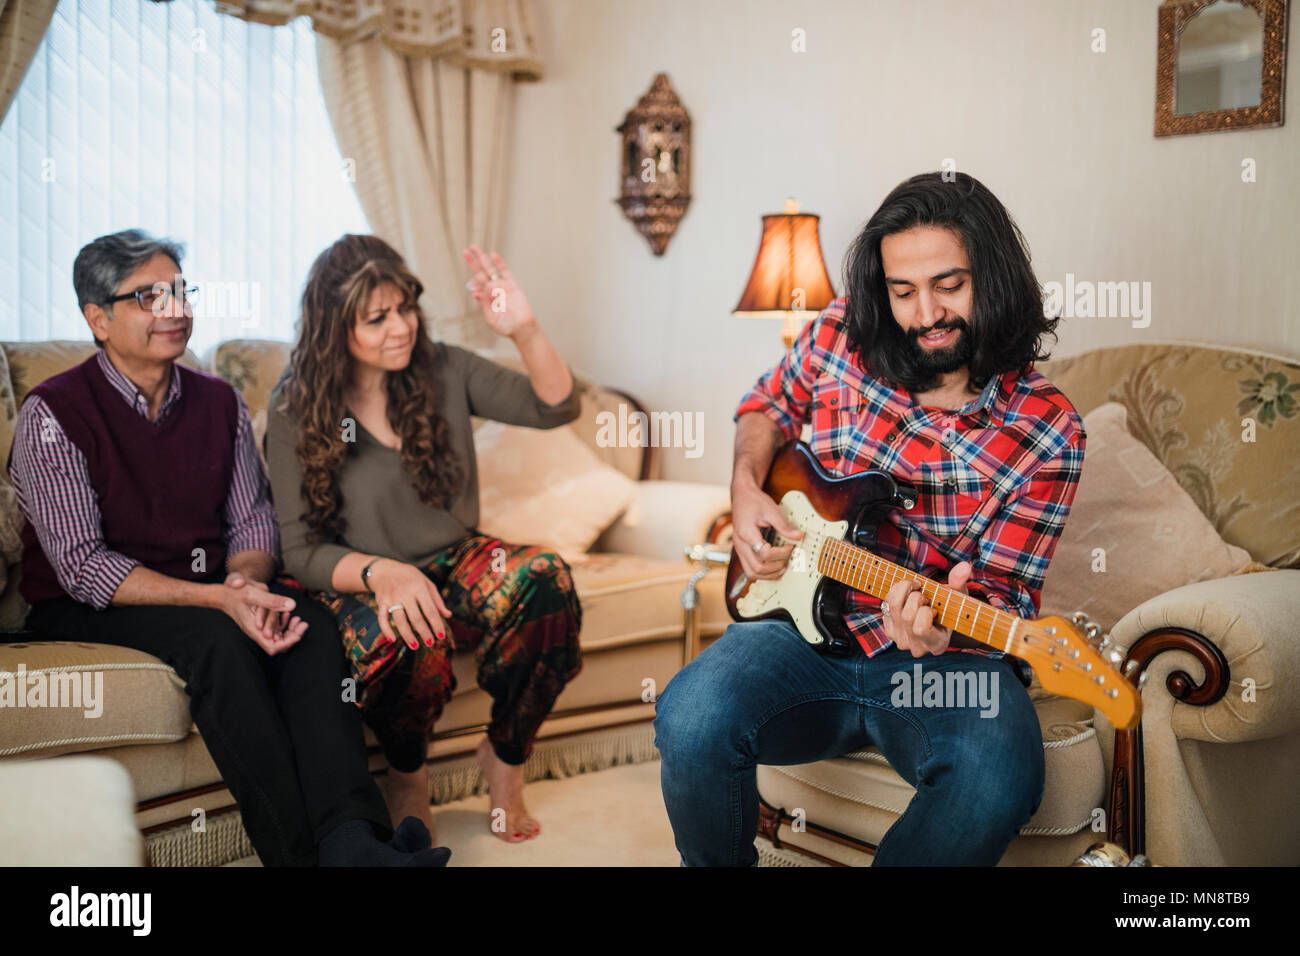 Mid adult man is playing guitar while visiting his parents home. They are sitting on the sofa, dancing and singing along in the background. Stock Photo